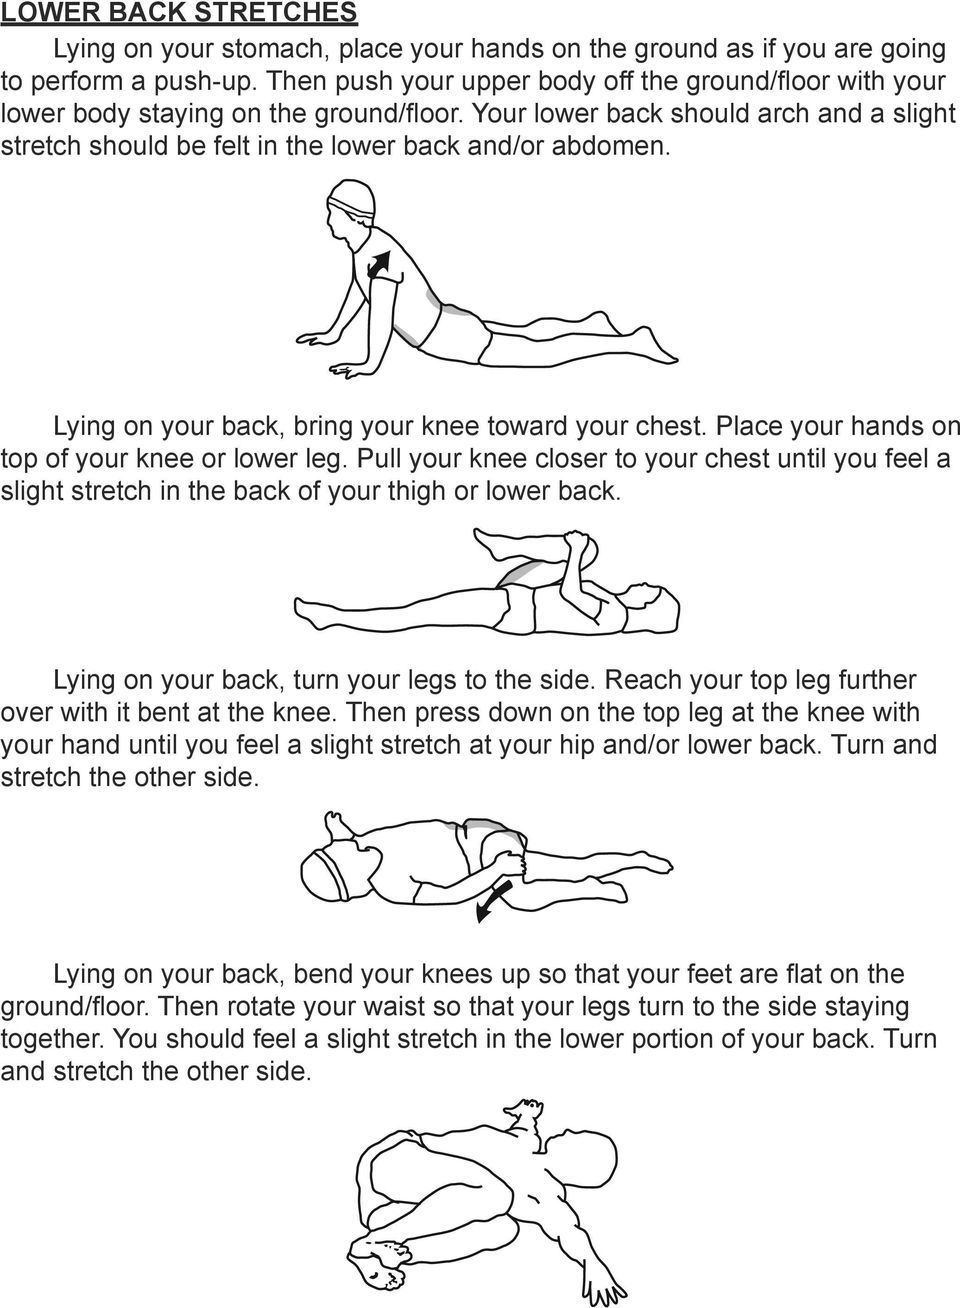 Lying on your back, bring your knee toward your chest. Place your hands on top of your knee or lower leg.